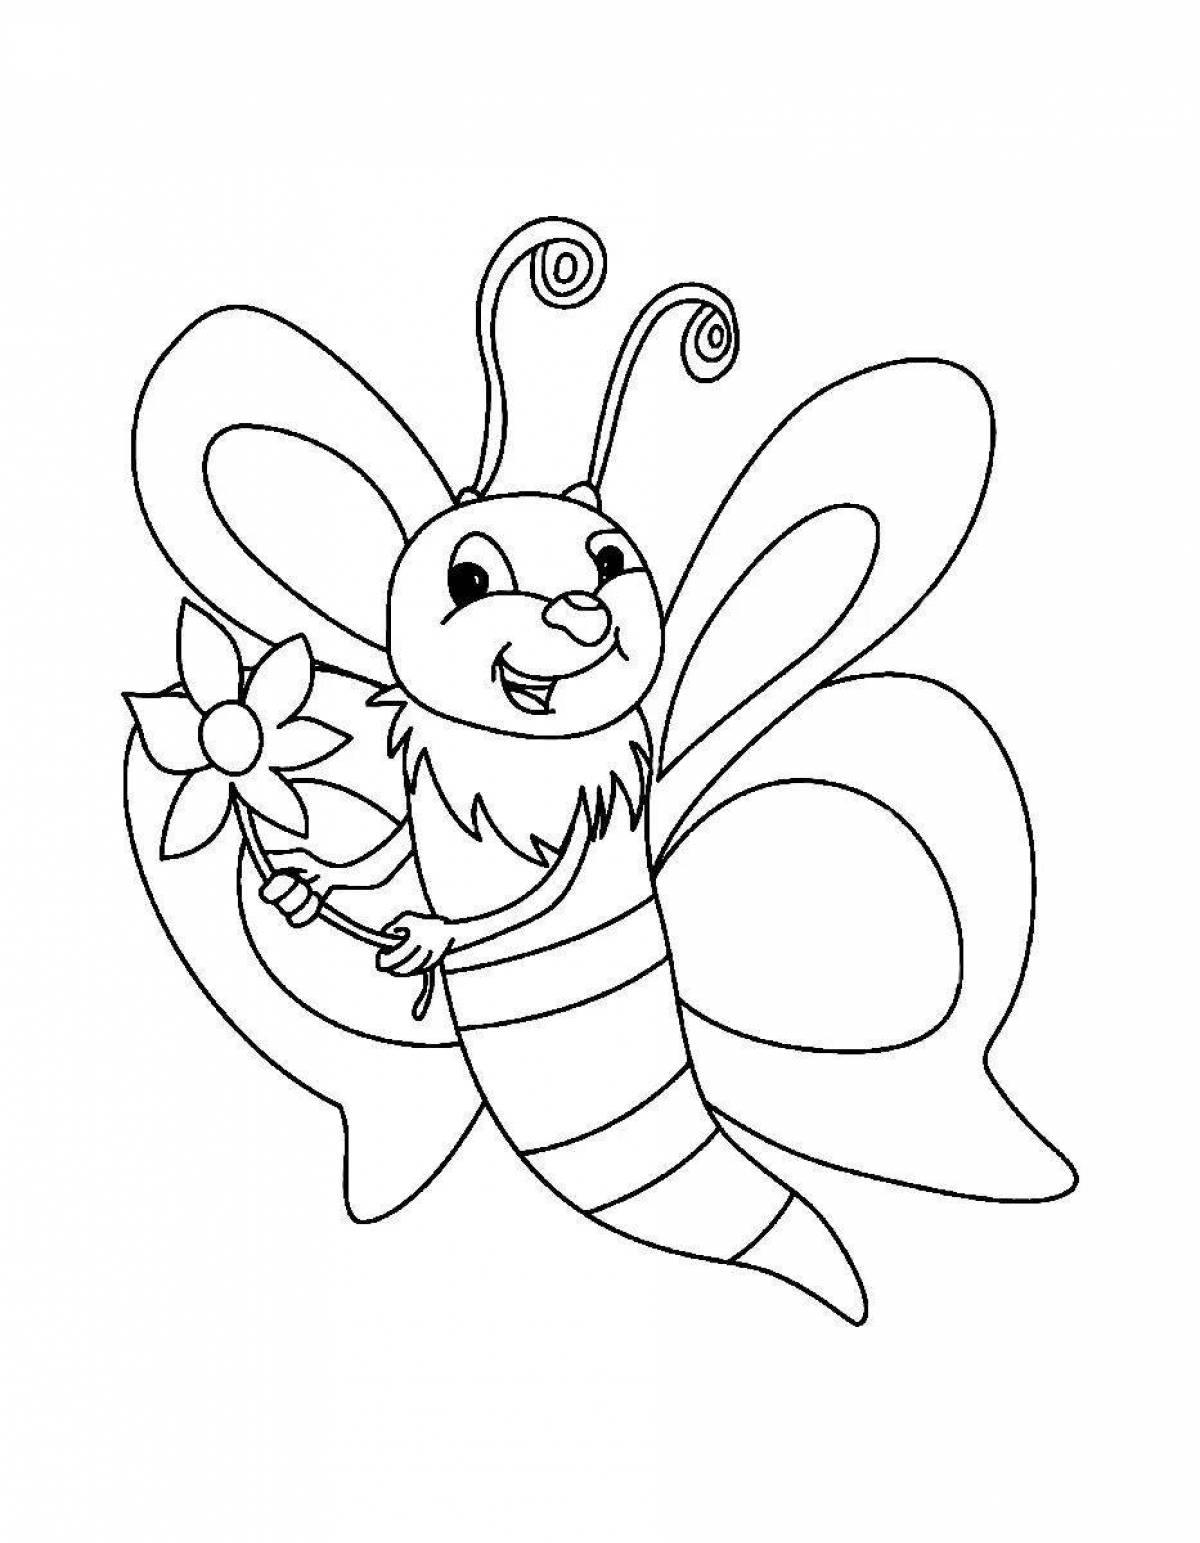 Exquisite bee coloring book for kids